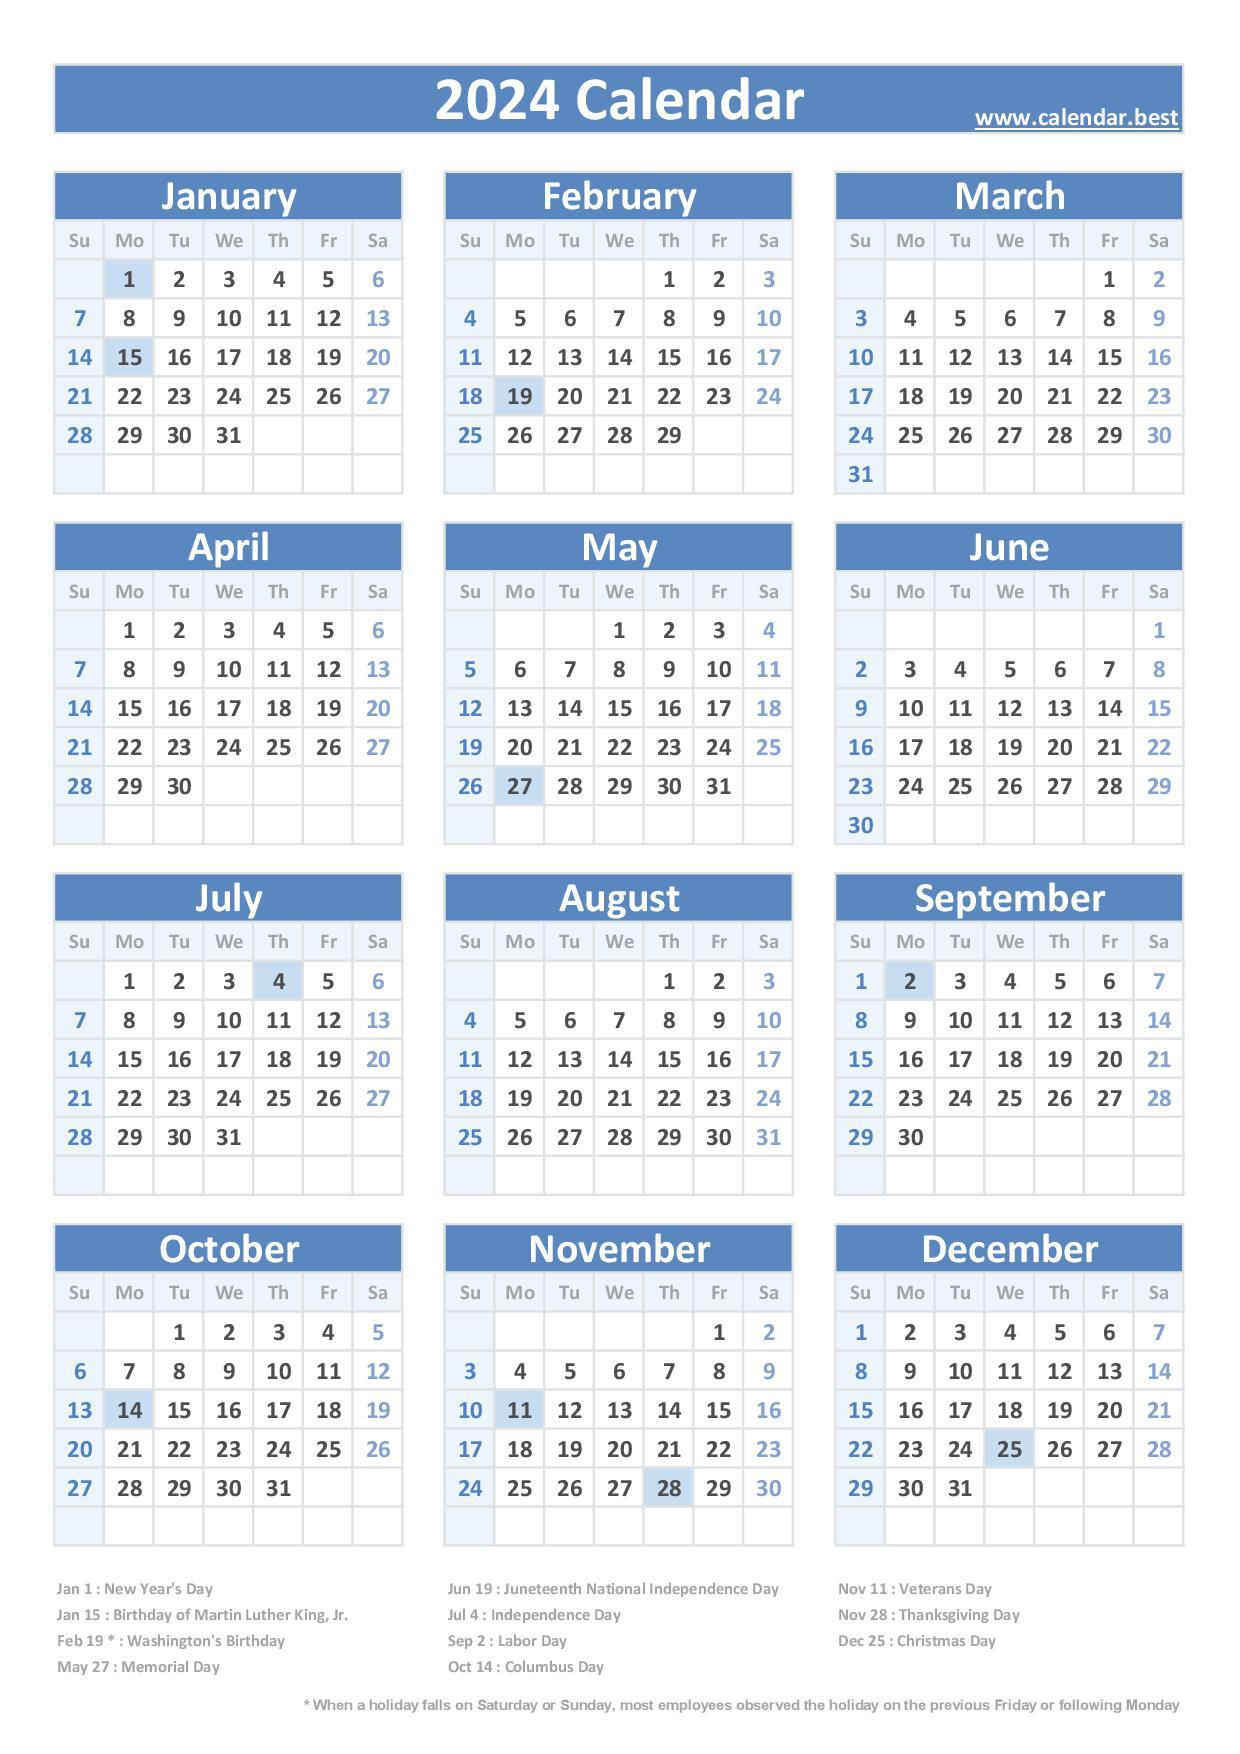 2024 Calendar With Holidays (Us Federal Holidays) in Free Printable Calendar 2024 With Federal Holidays